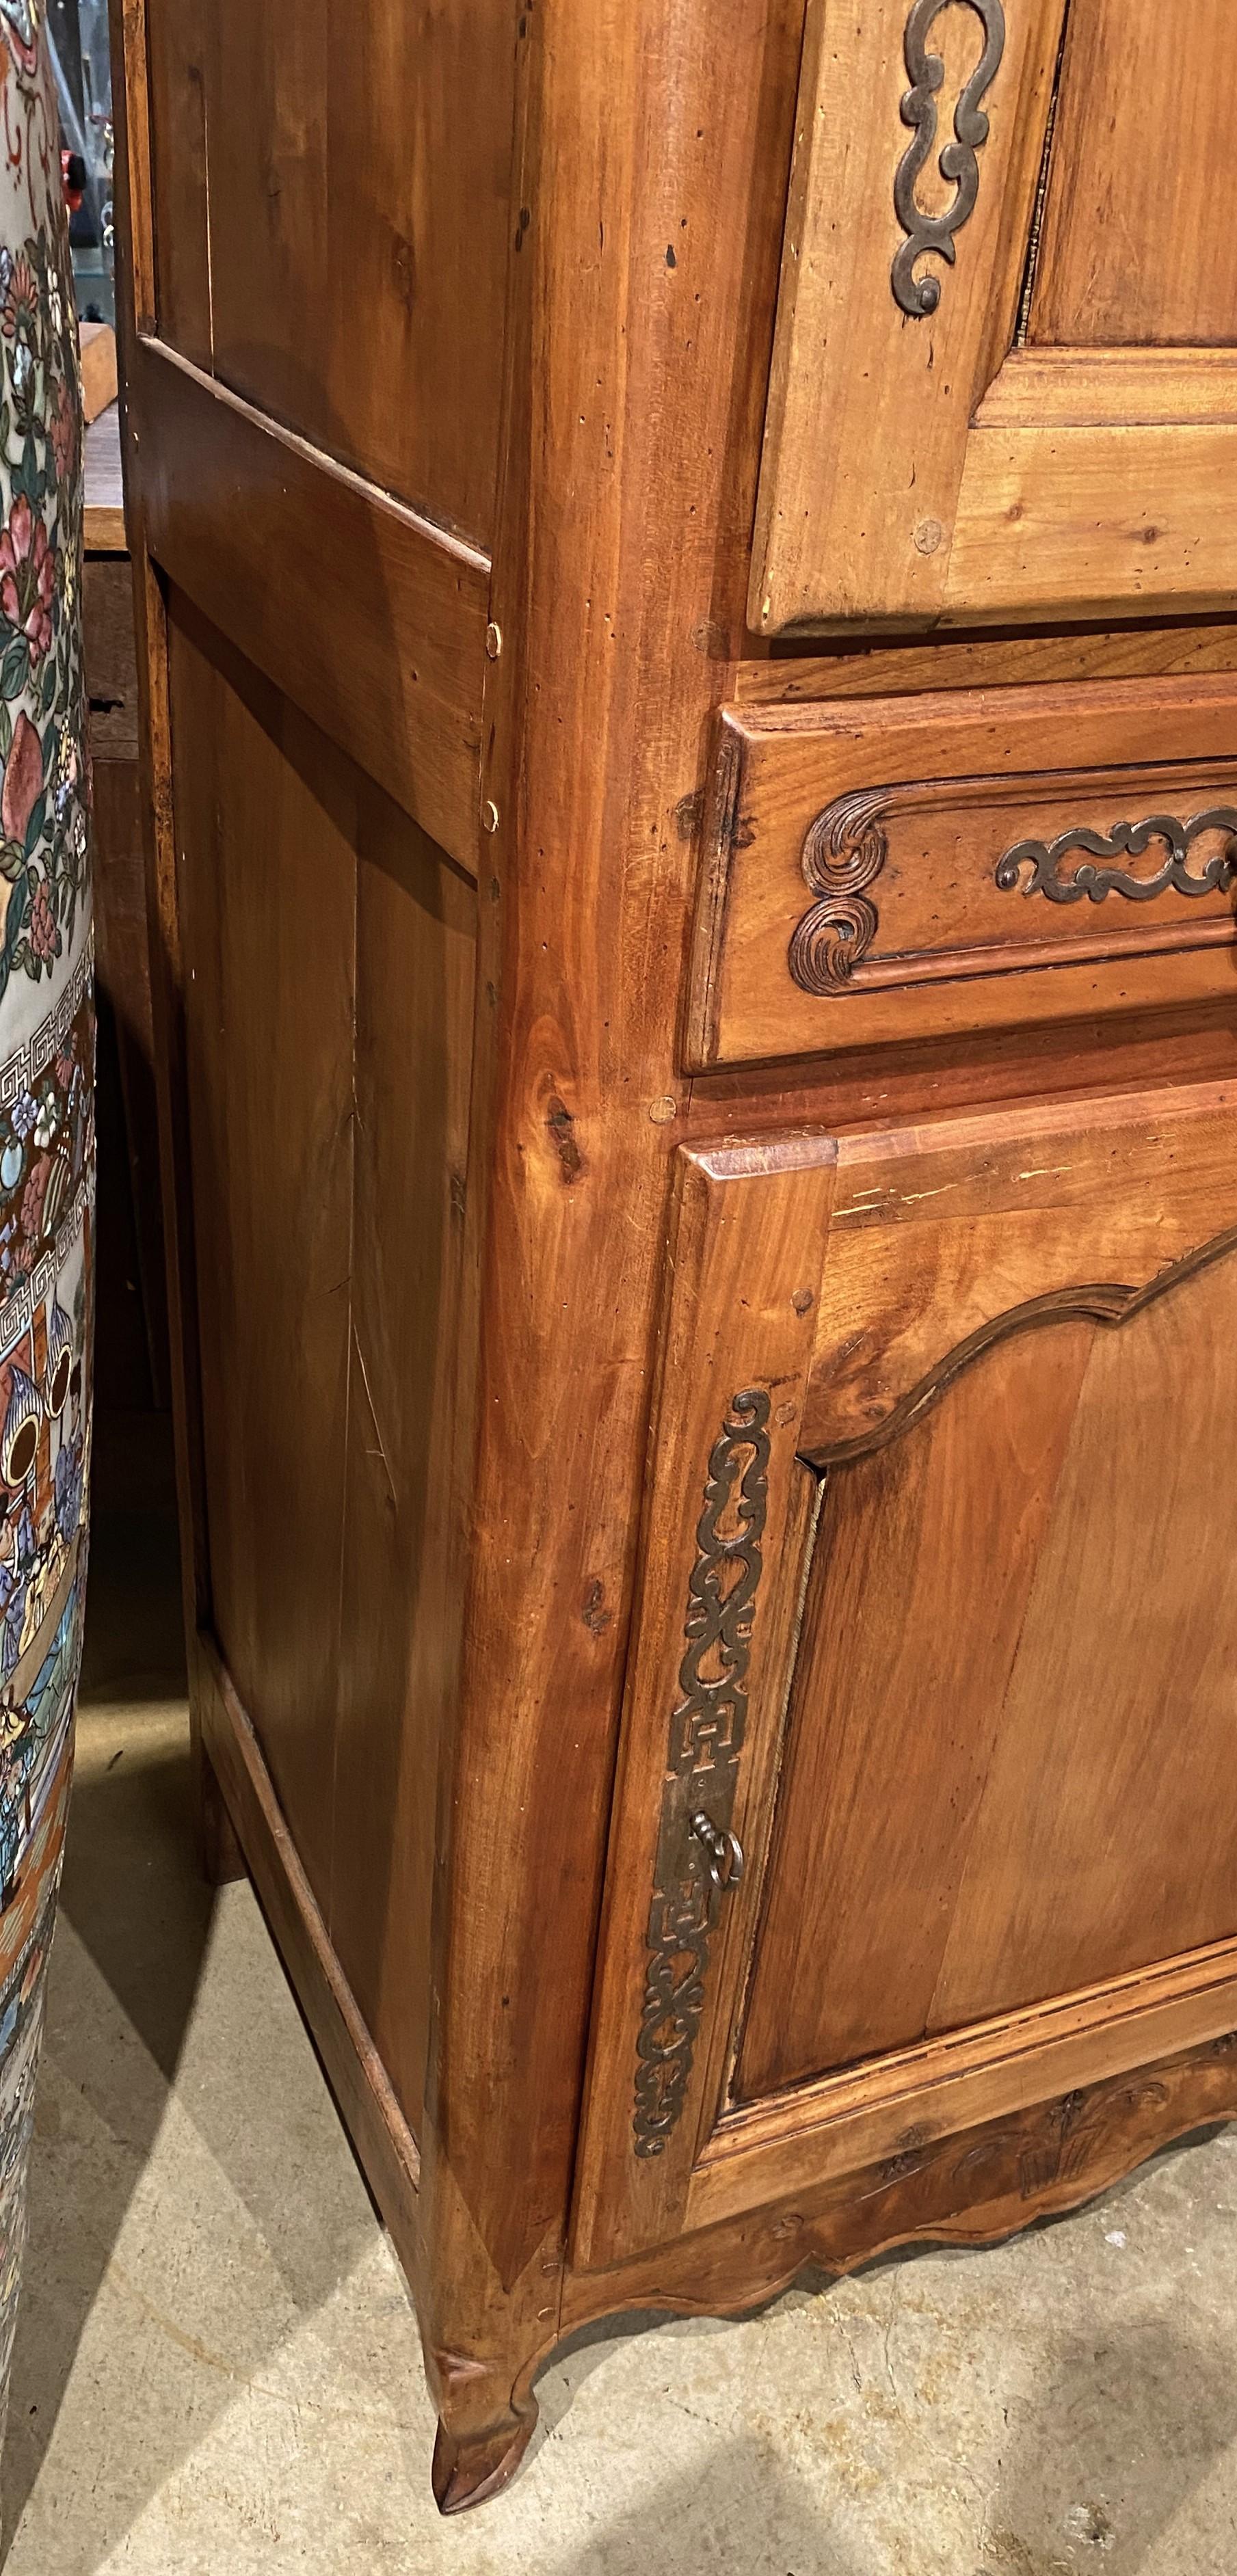 French Country Two Door Fruitwood Cupboard with Carved Floral Detail In Good Condition For Sale In Milford, NH